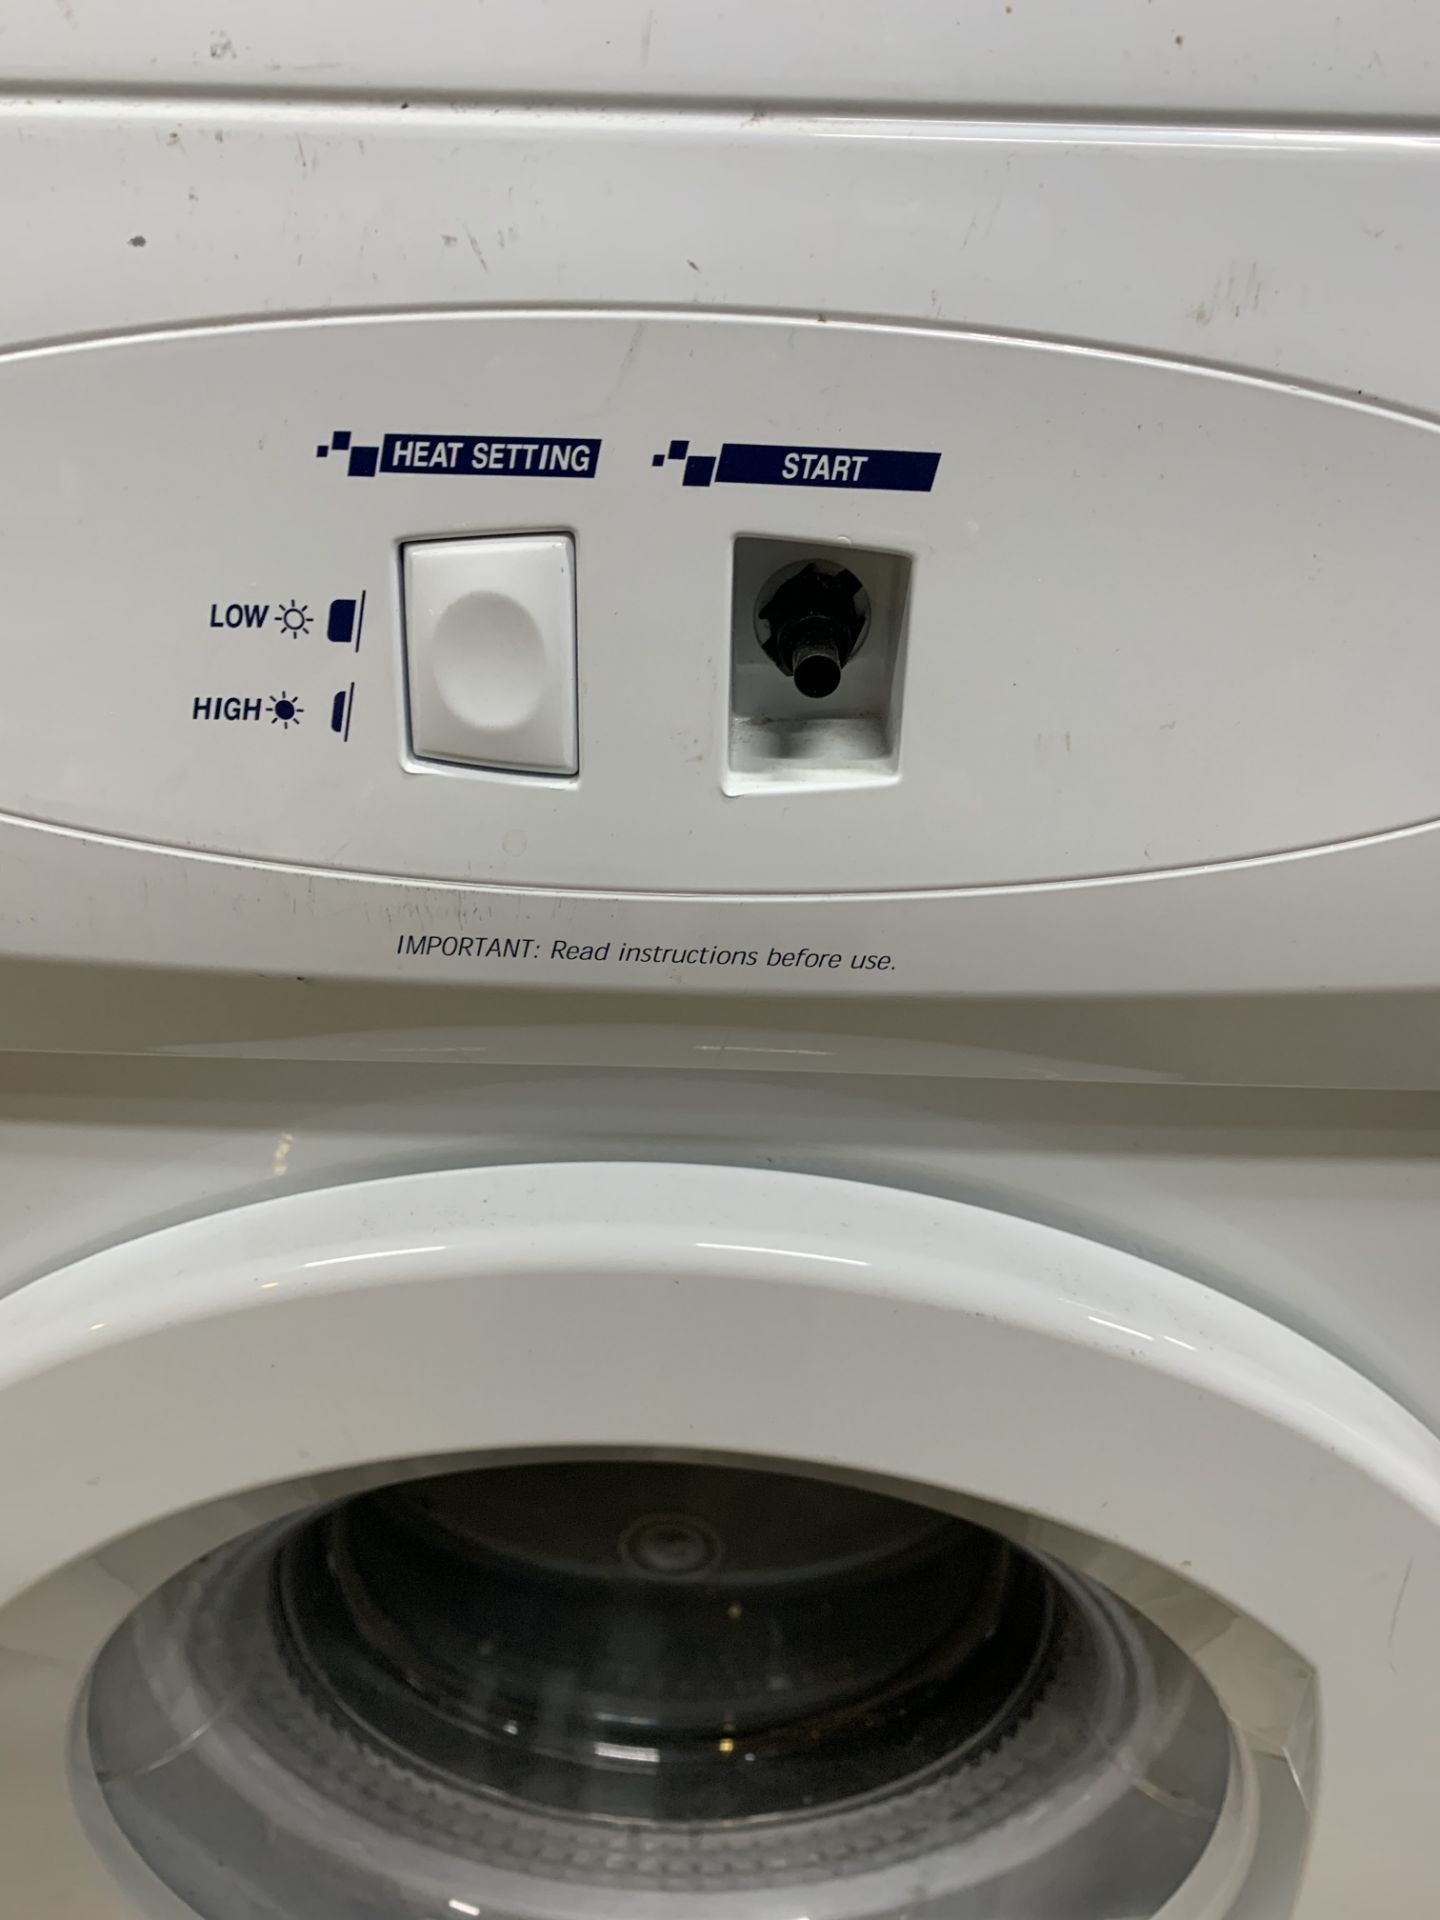 White Knight C44A7W Vented Tumble Dryer - Image 2 of 2